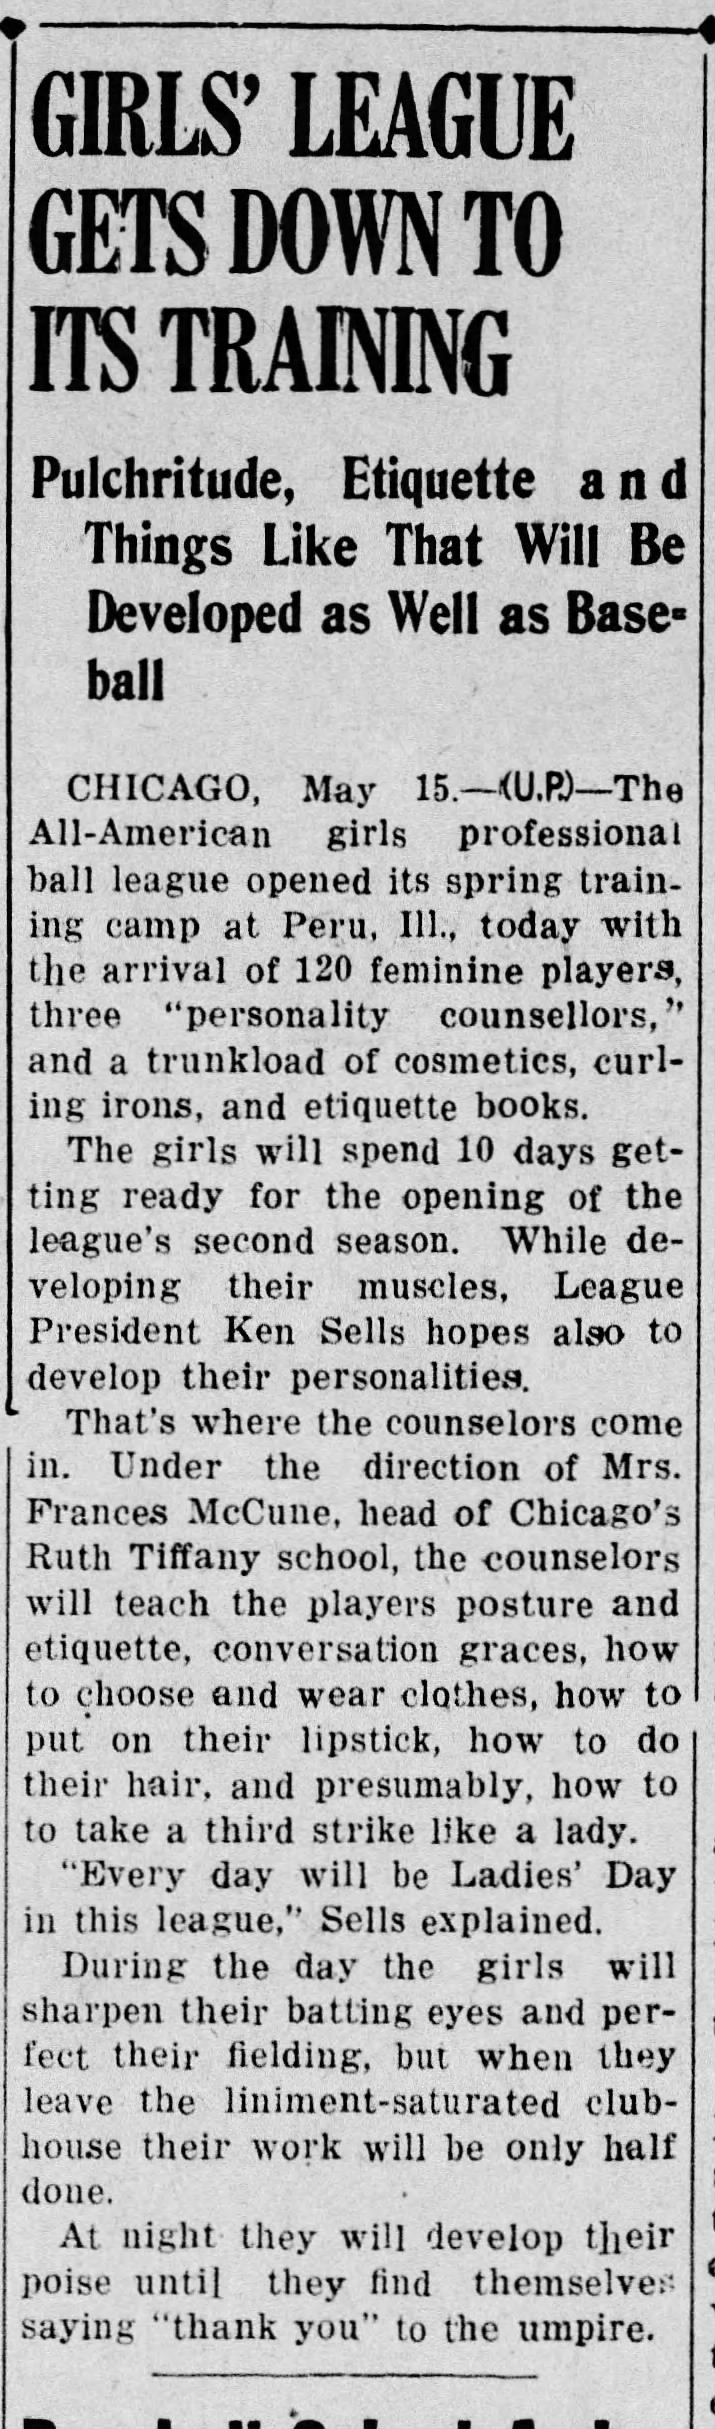 All-American Girls Professional Ball League spring training includes grooming and etiquette classes